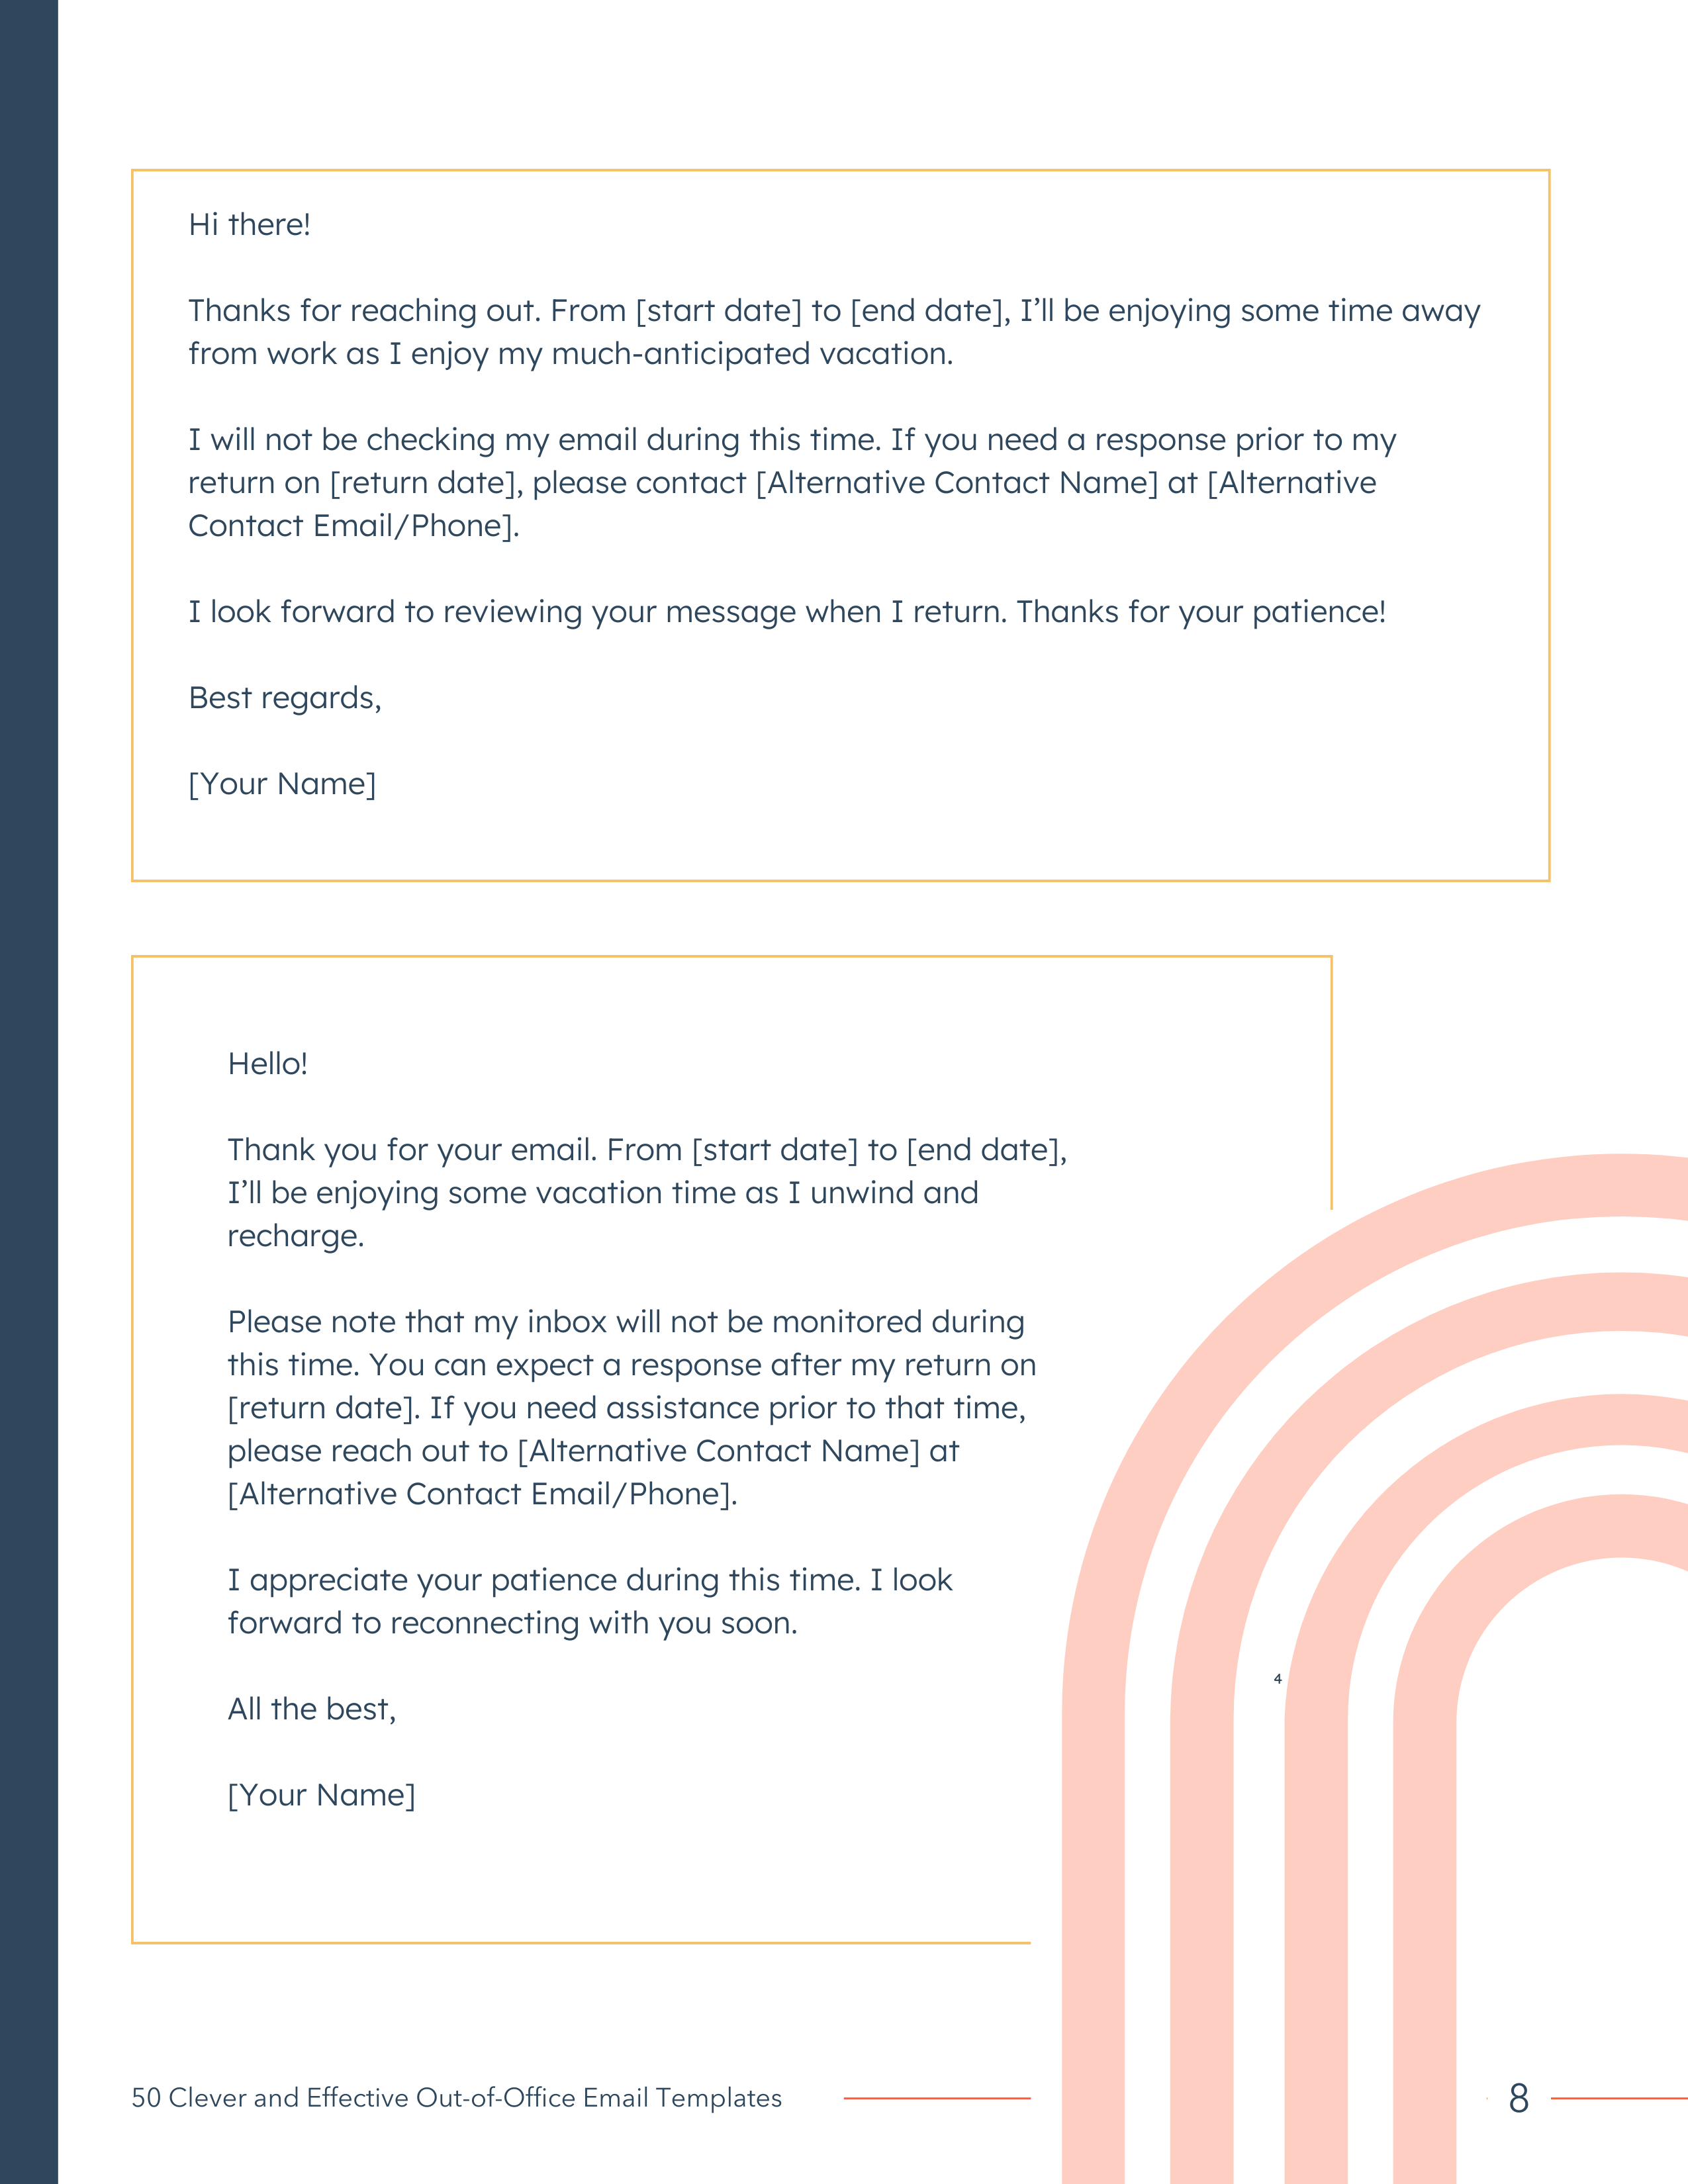 ebook - OOO Email Templates copy 3